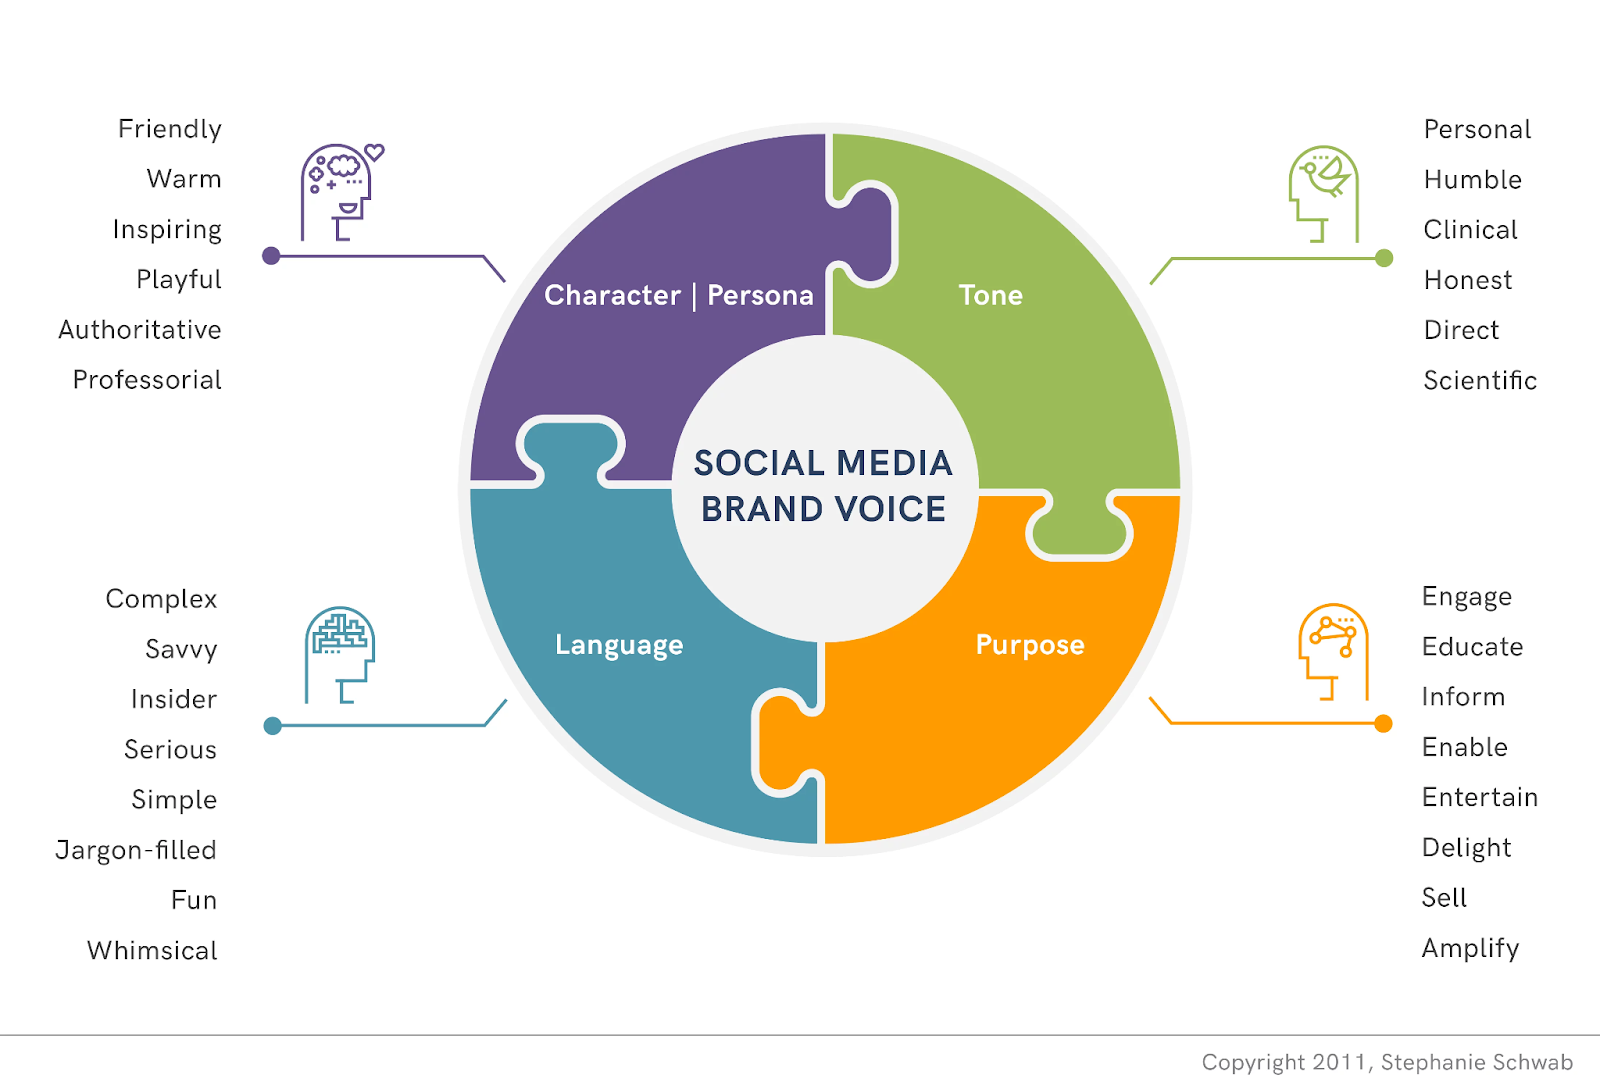 Building a social media brand voice means choosing tone, purpose, language, and a persona.